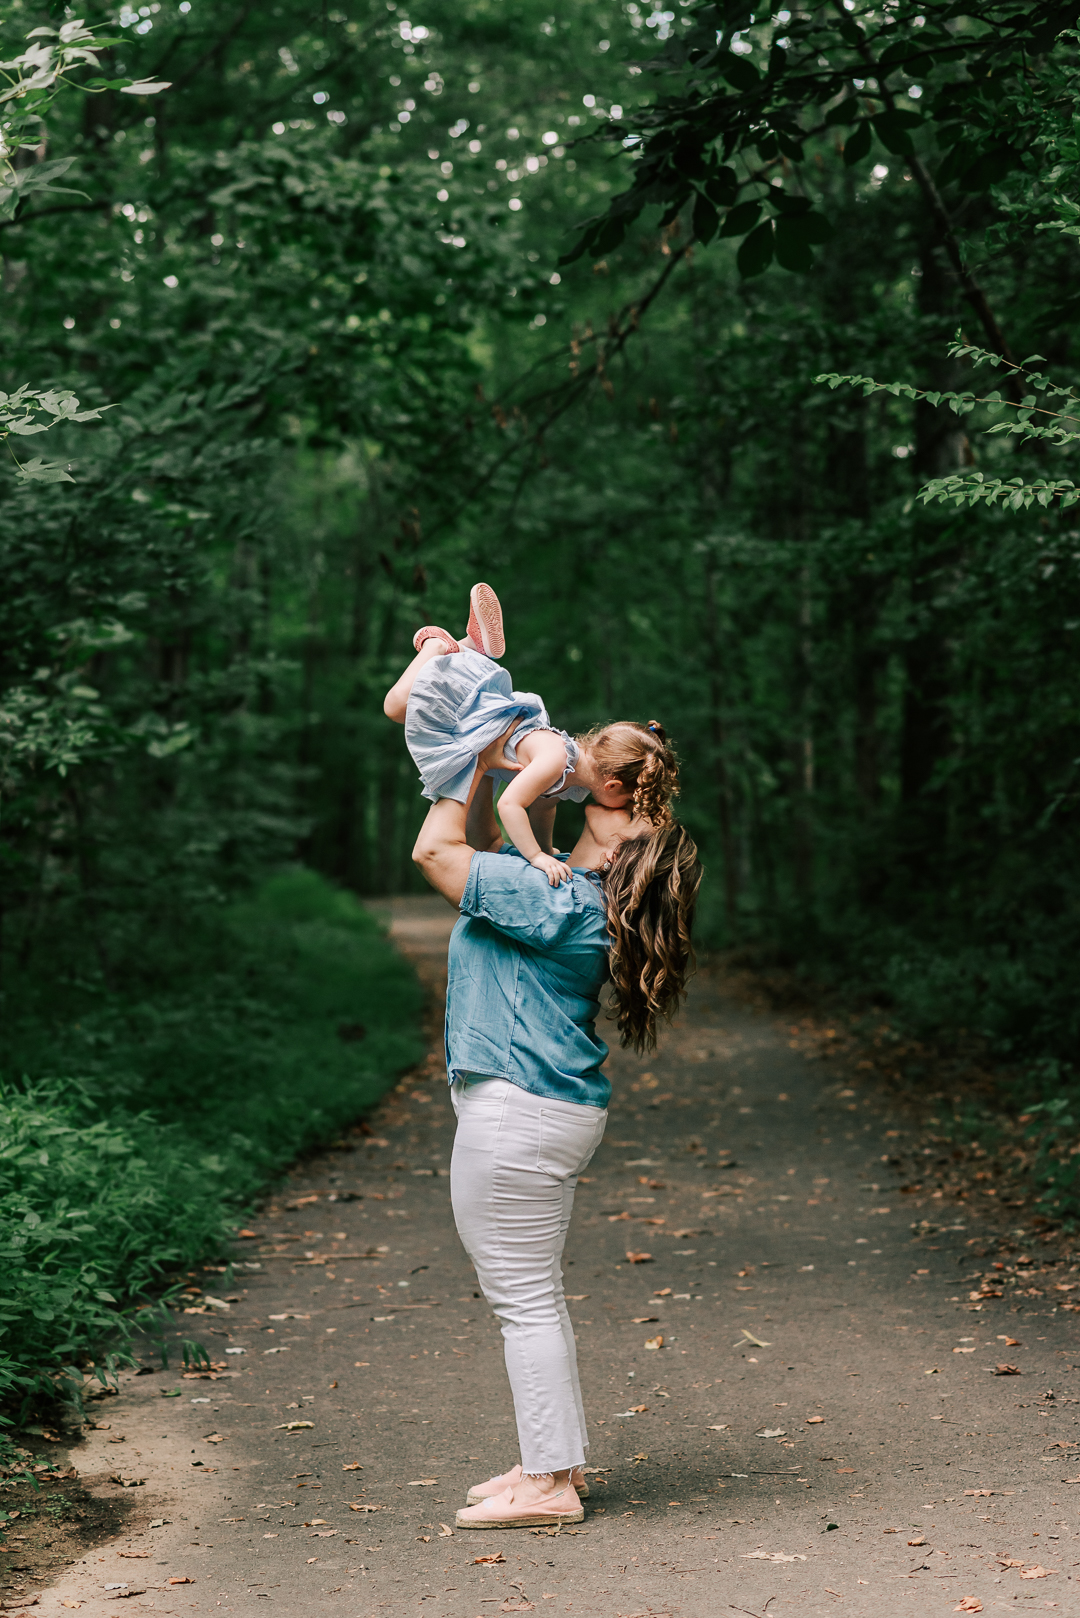 A mother stands in a wooded park path while lifting and kissing her toddler daughter in a blue dress above her head after visiting a centreville chriopractic center